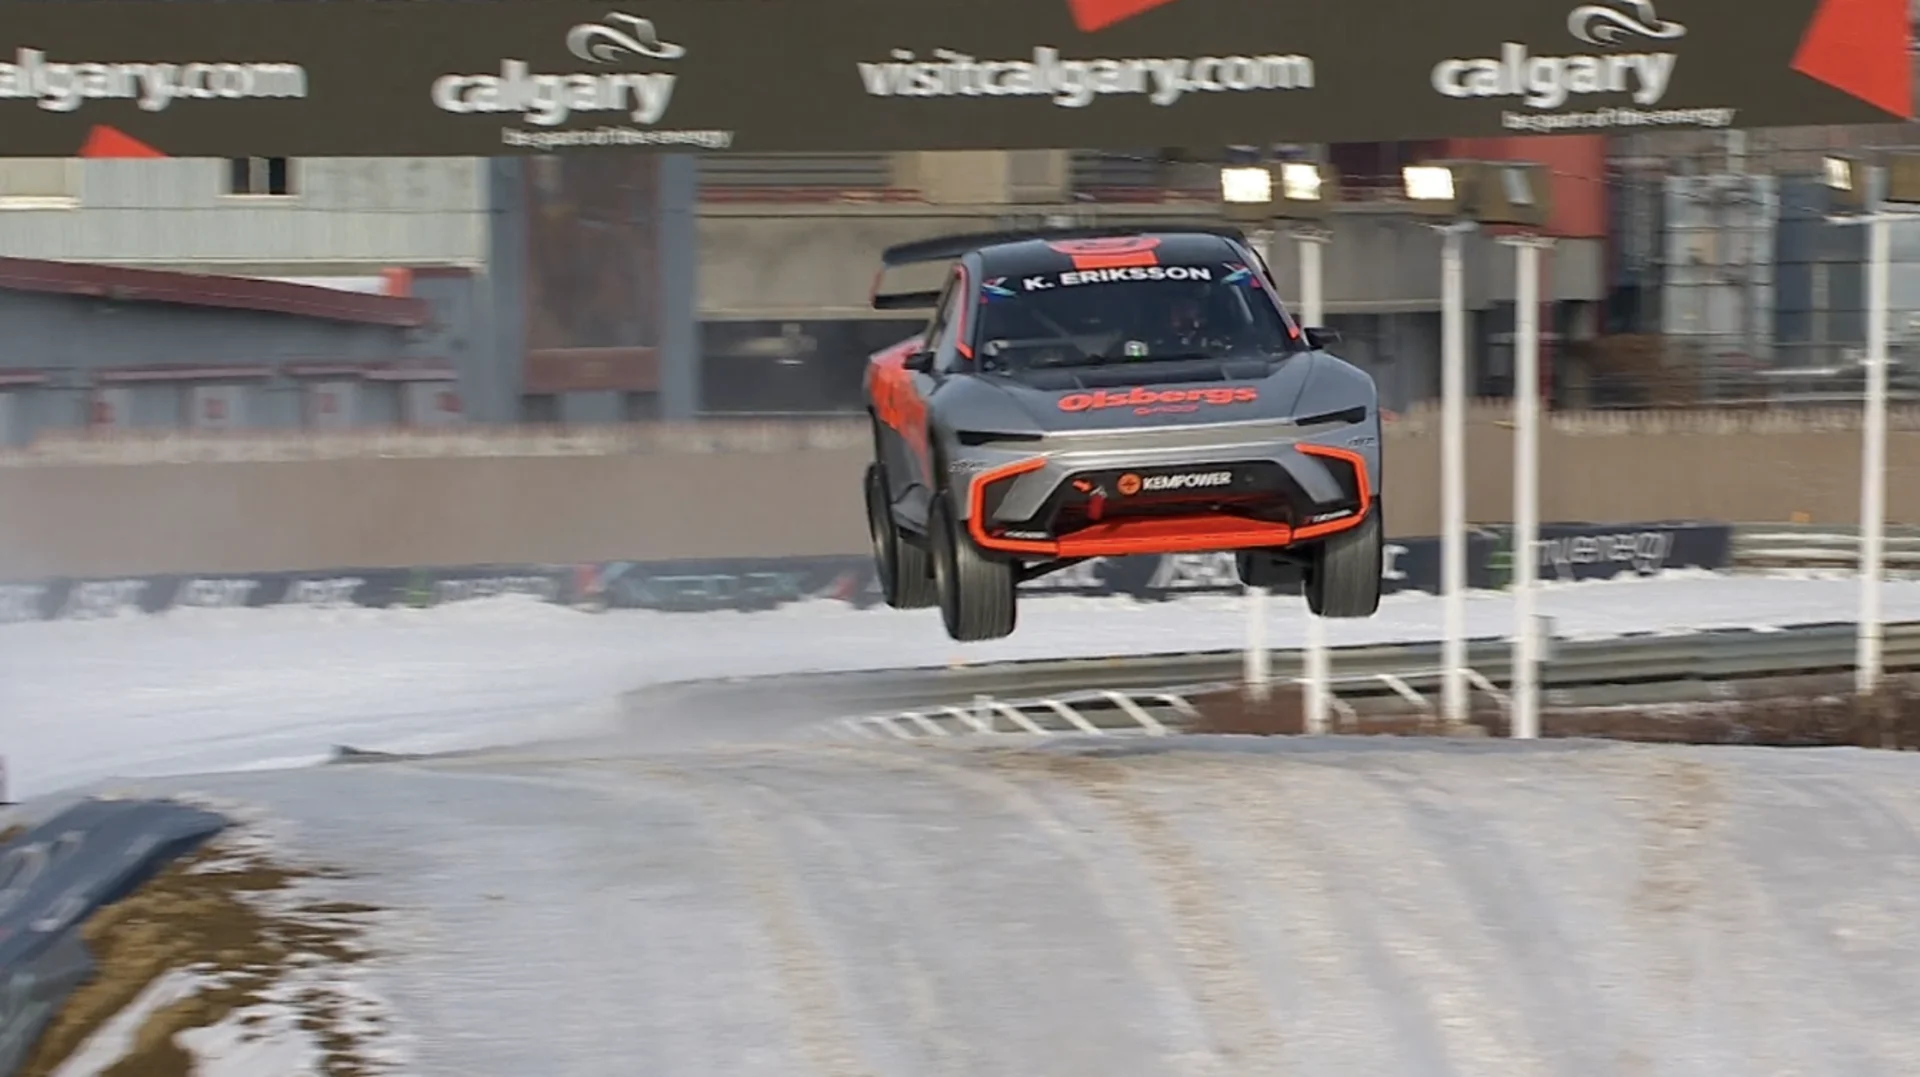 Three winter driving tips from an ice racing champion